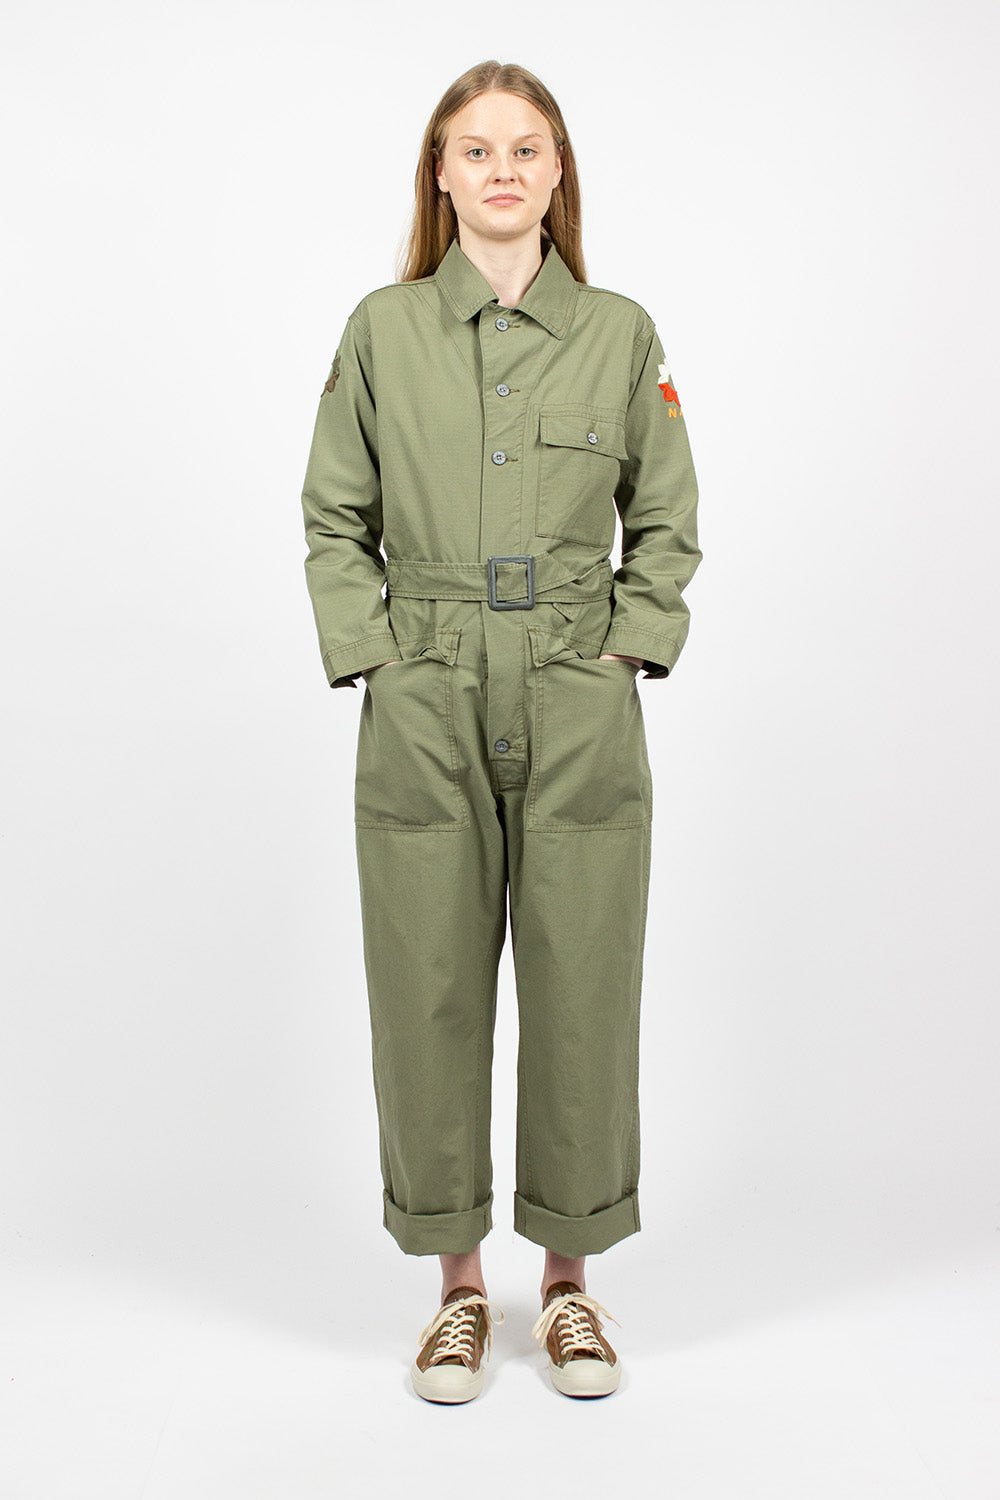 P-55 Coverall US Army